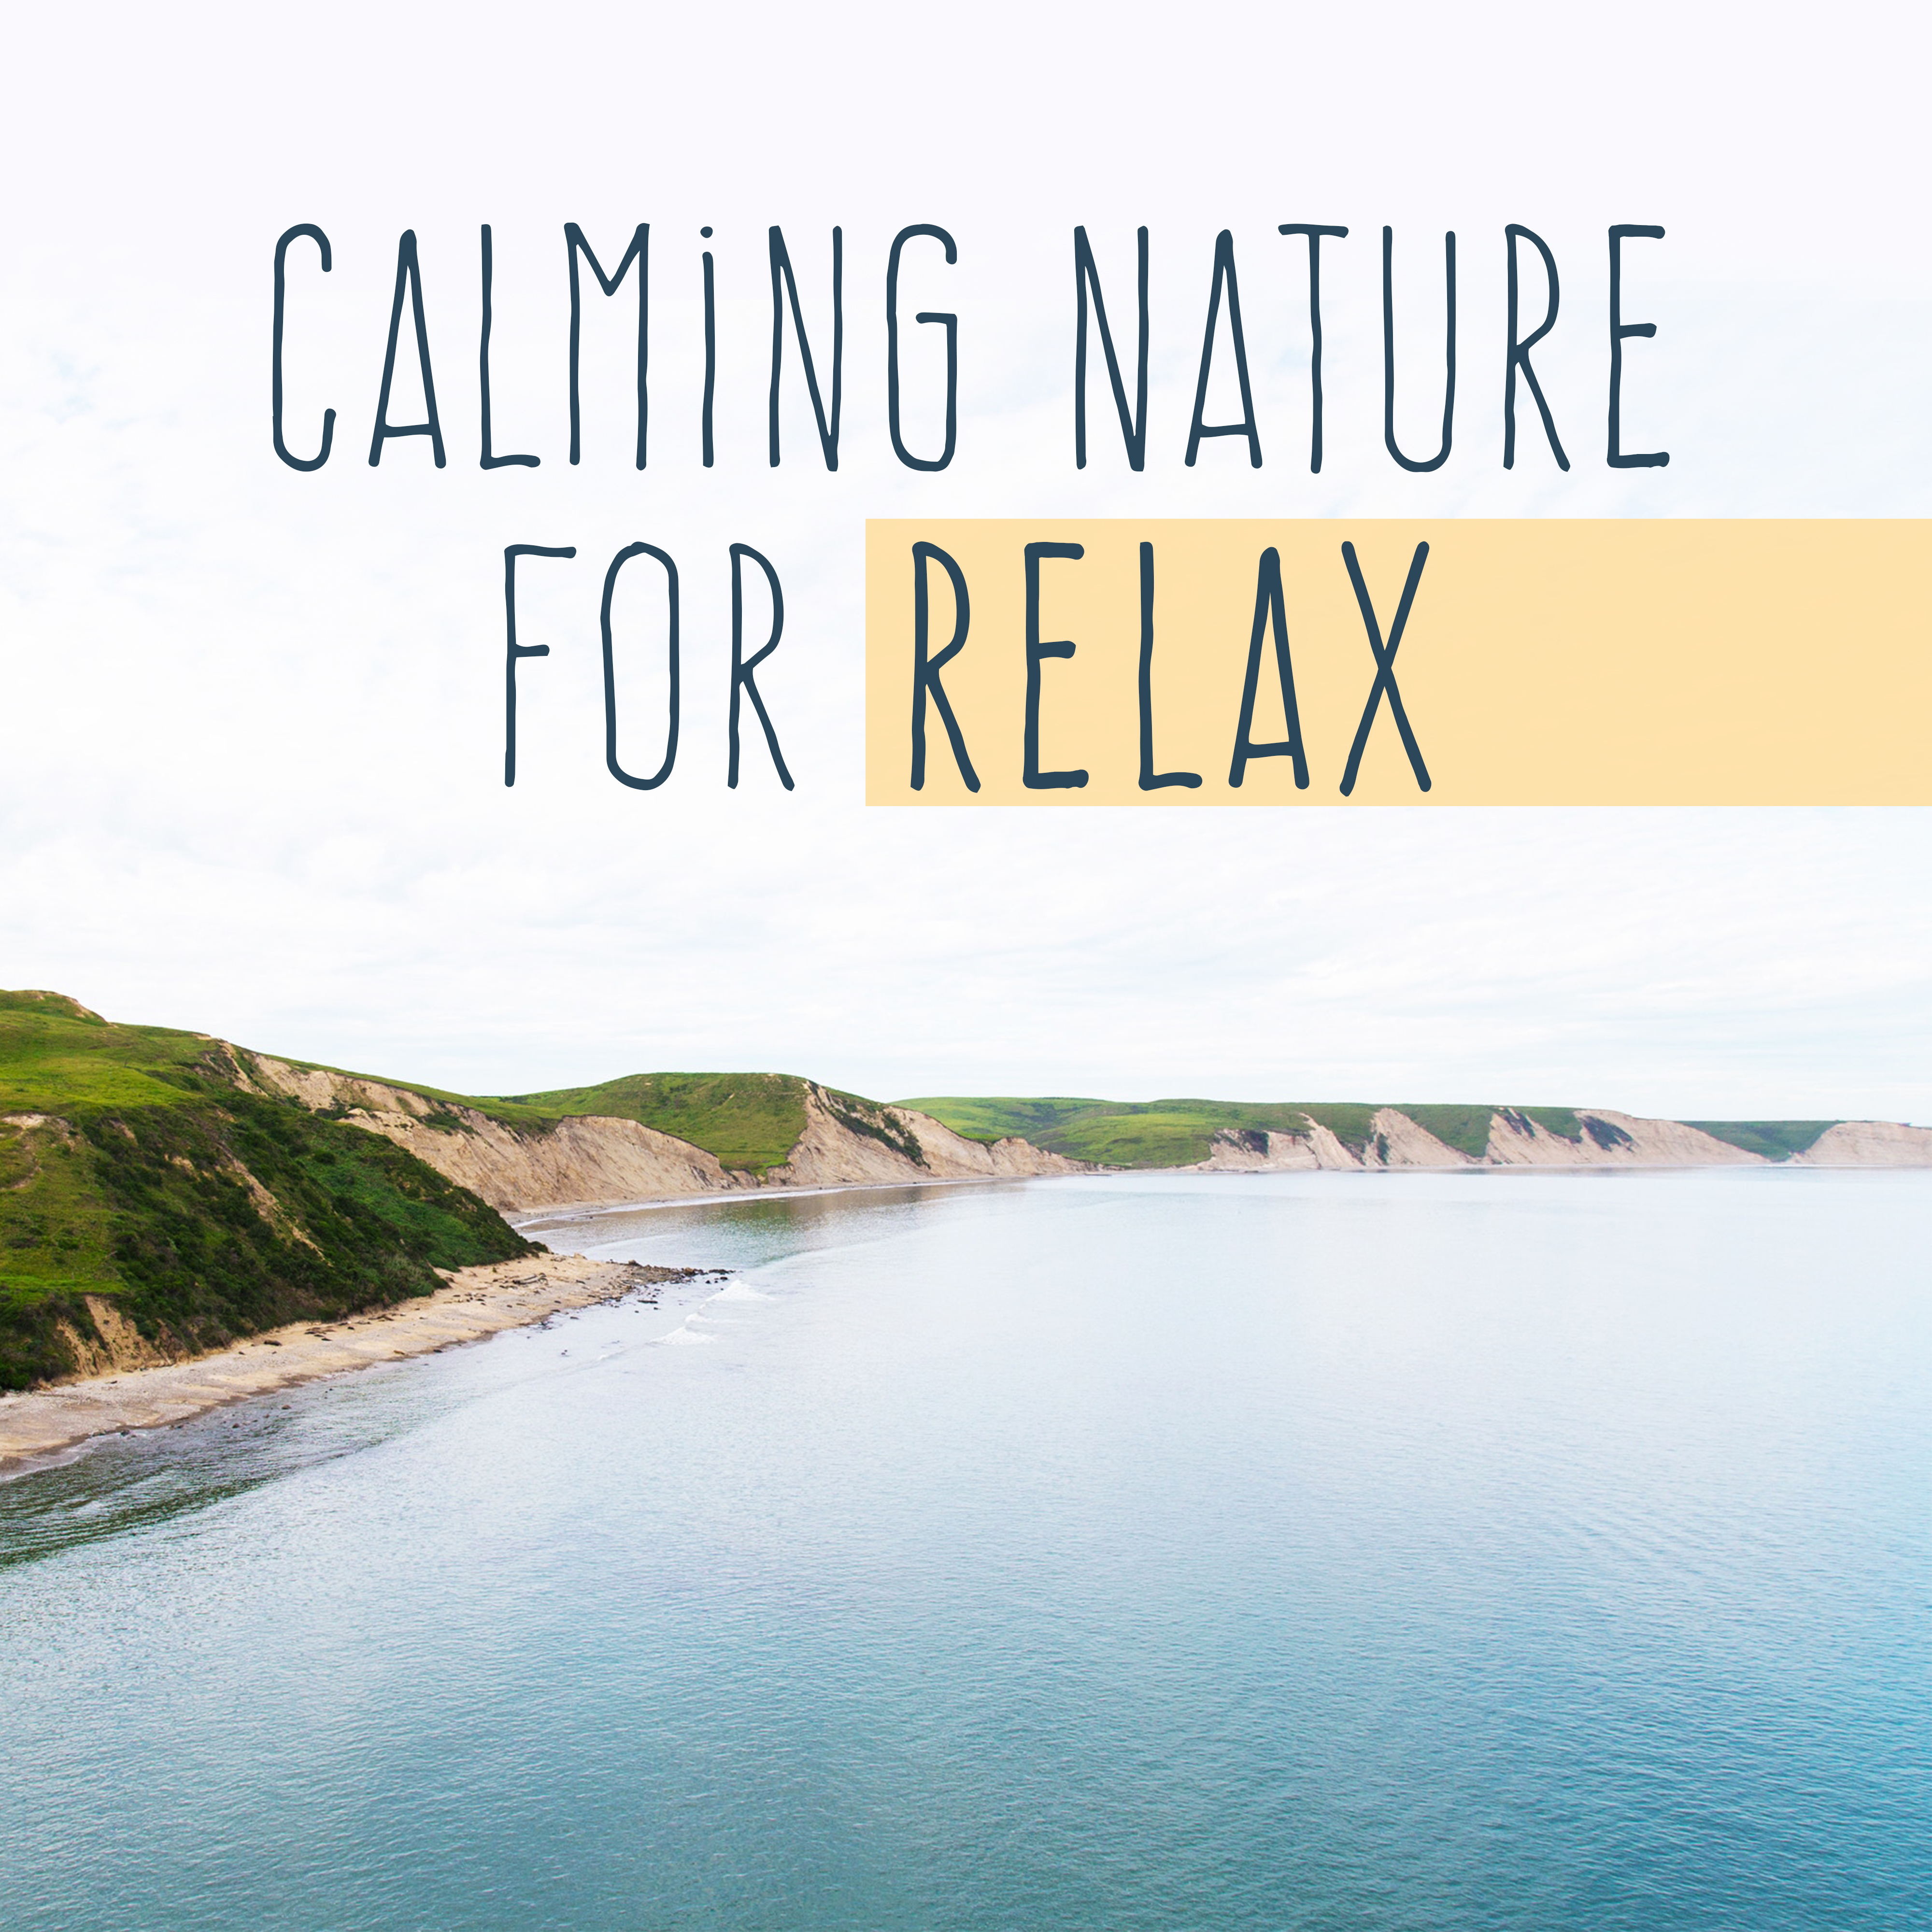 Calming Nature for Relax